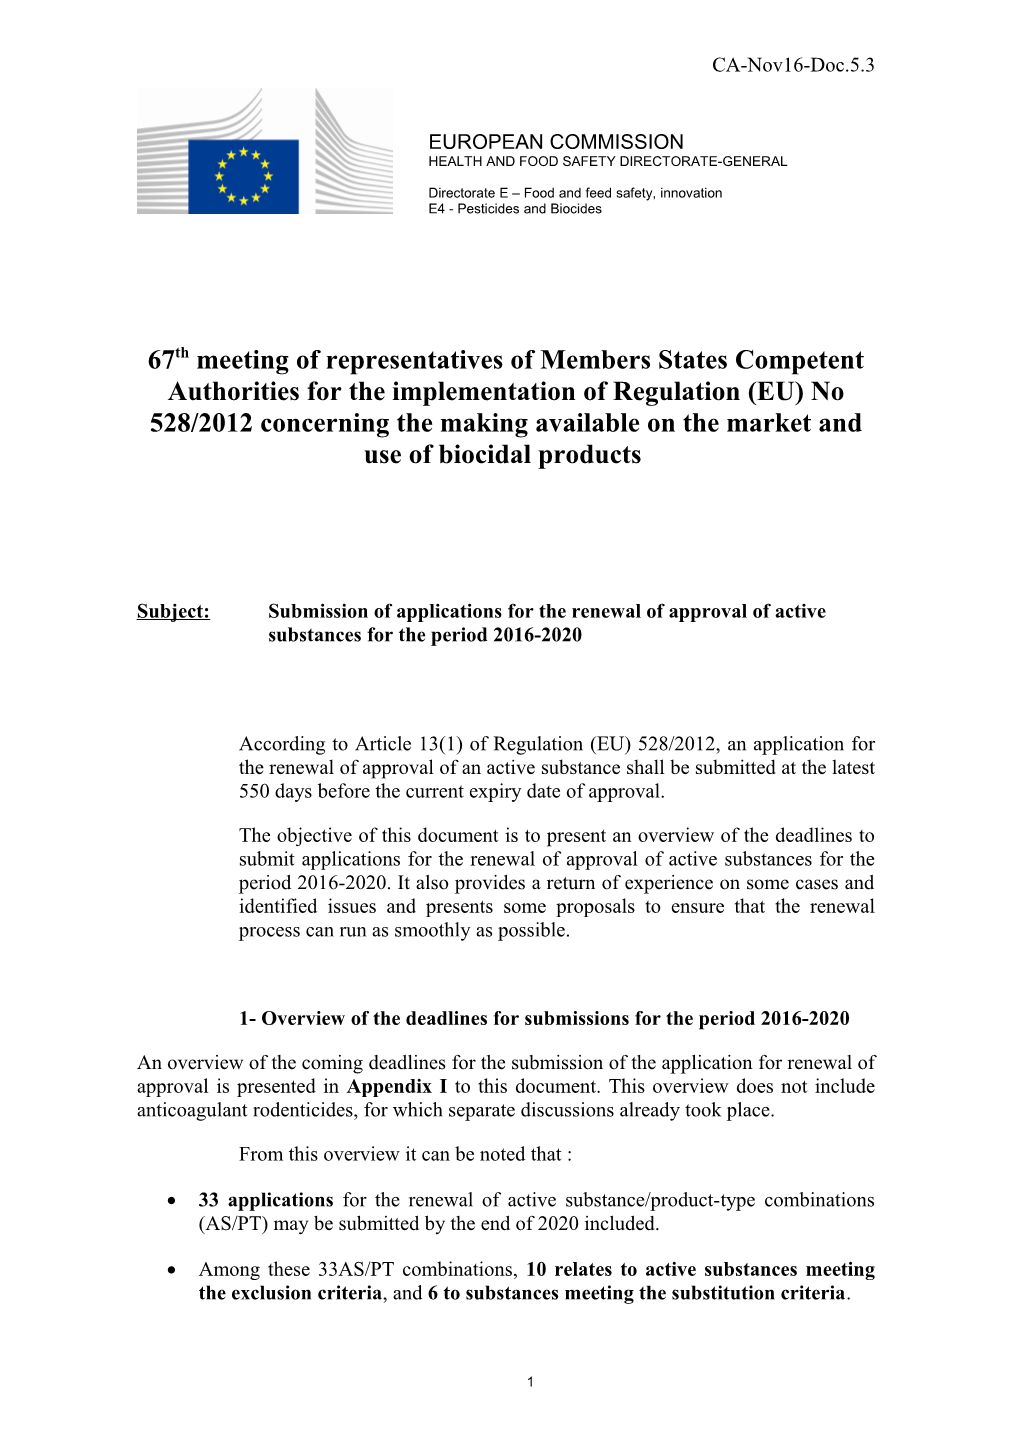 Subject: Submission of Applications for the Renewal of Approval of Active Substances For